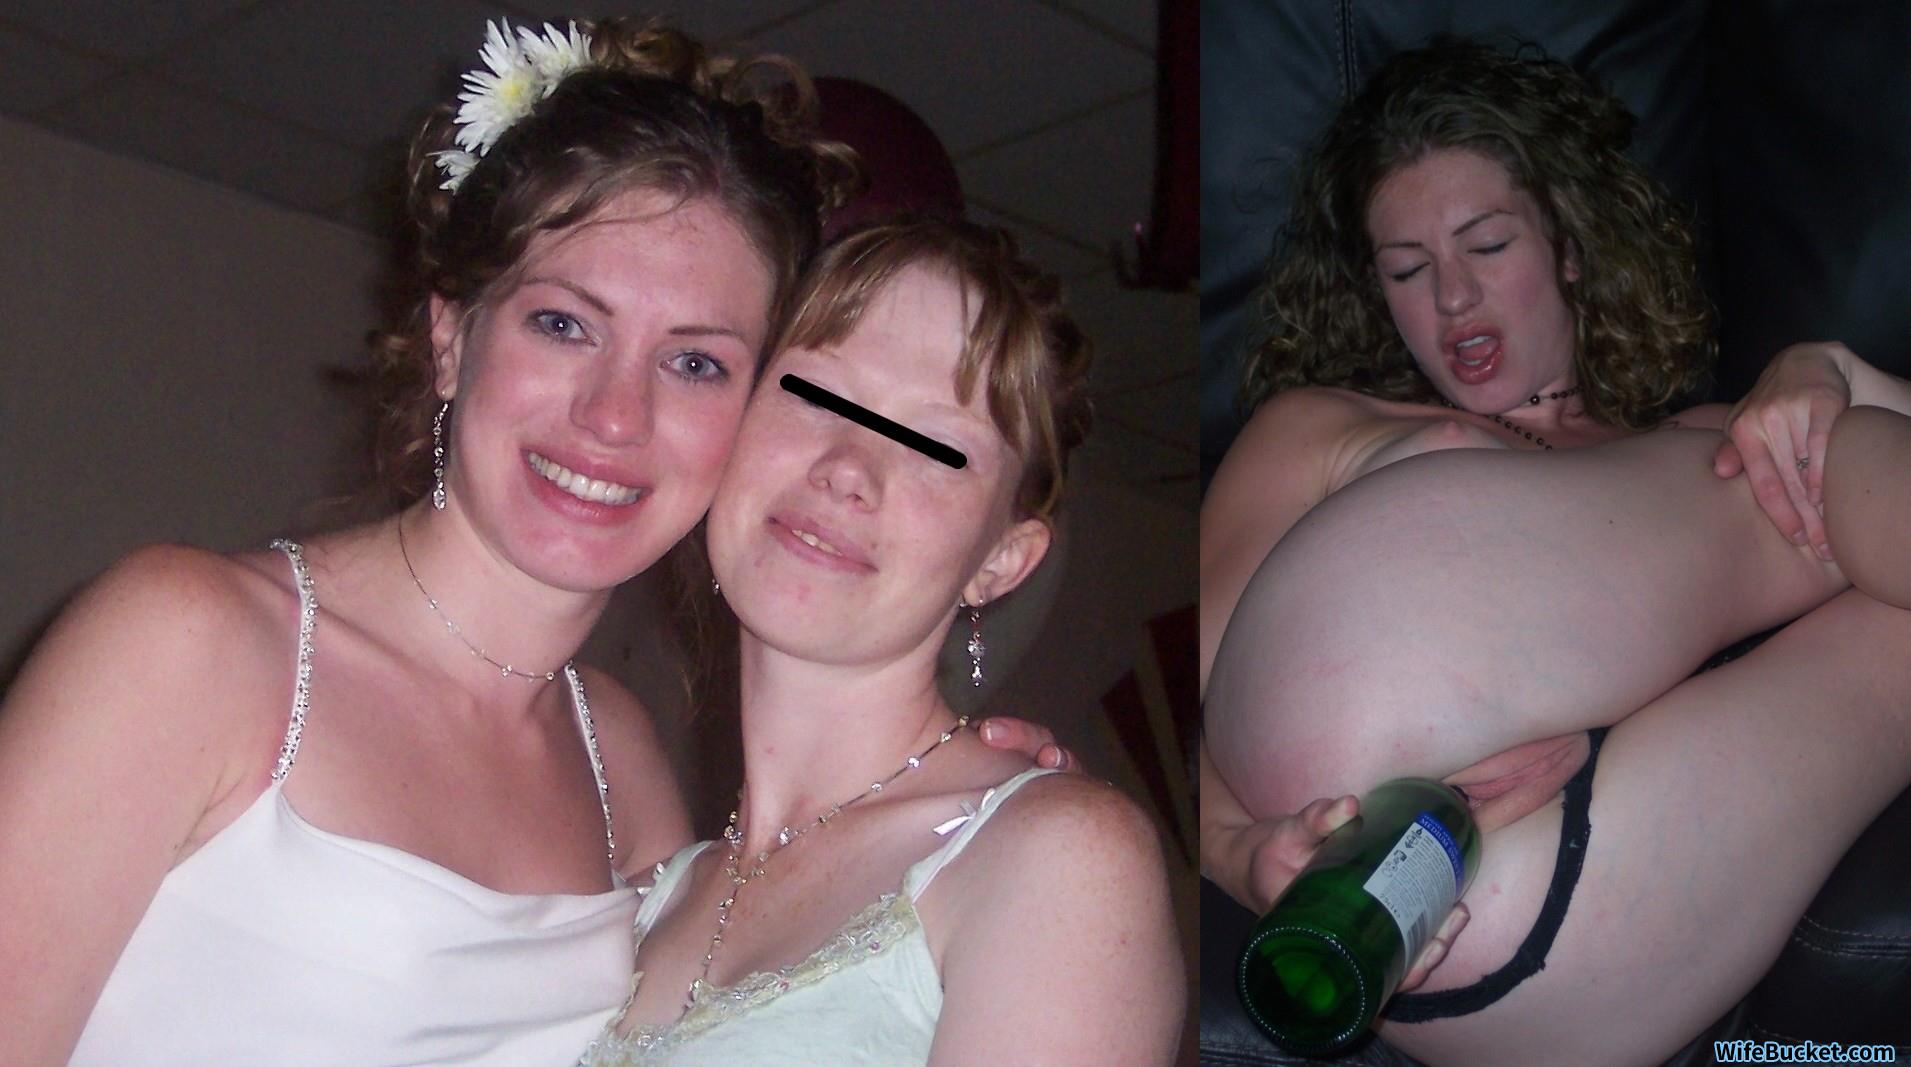 Before-after nudes of sexy amateur brides! Some home porn, too -) photo image